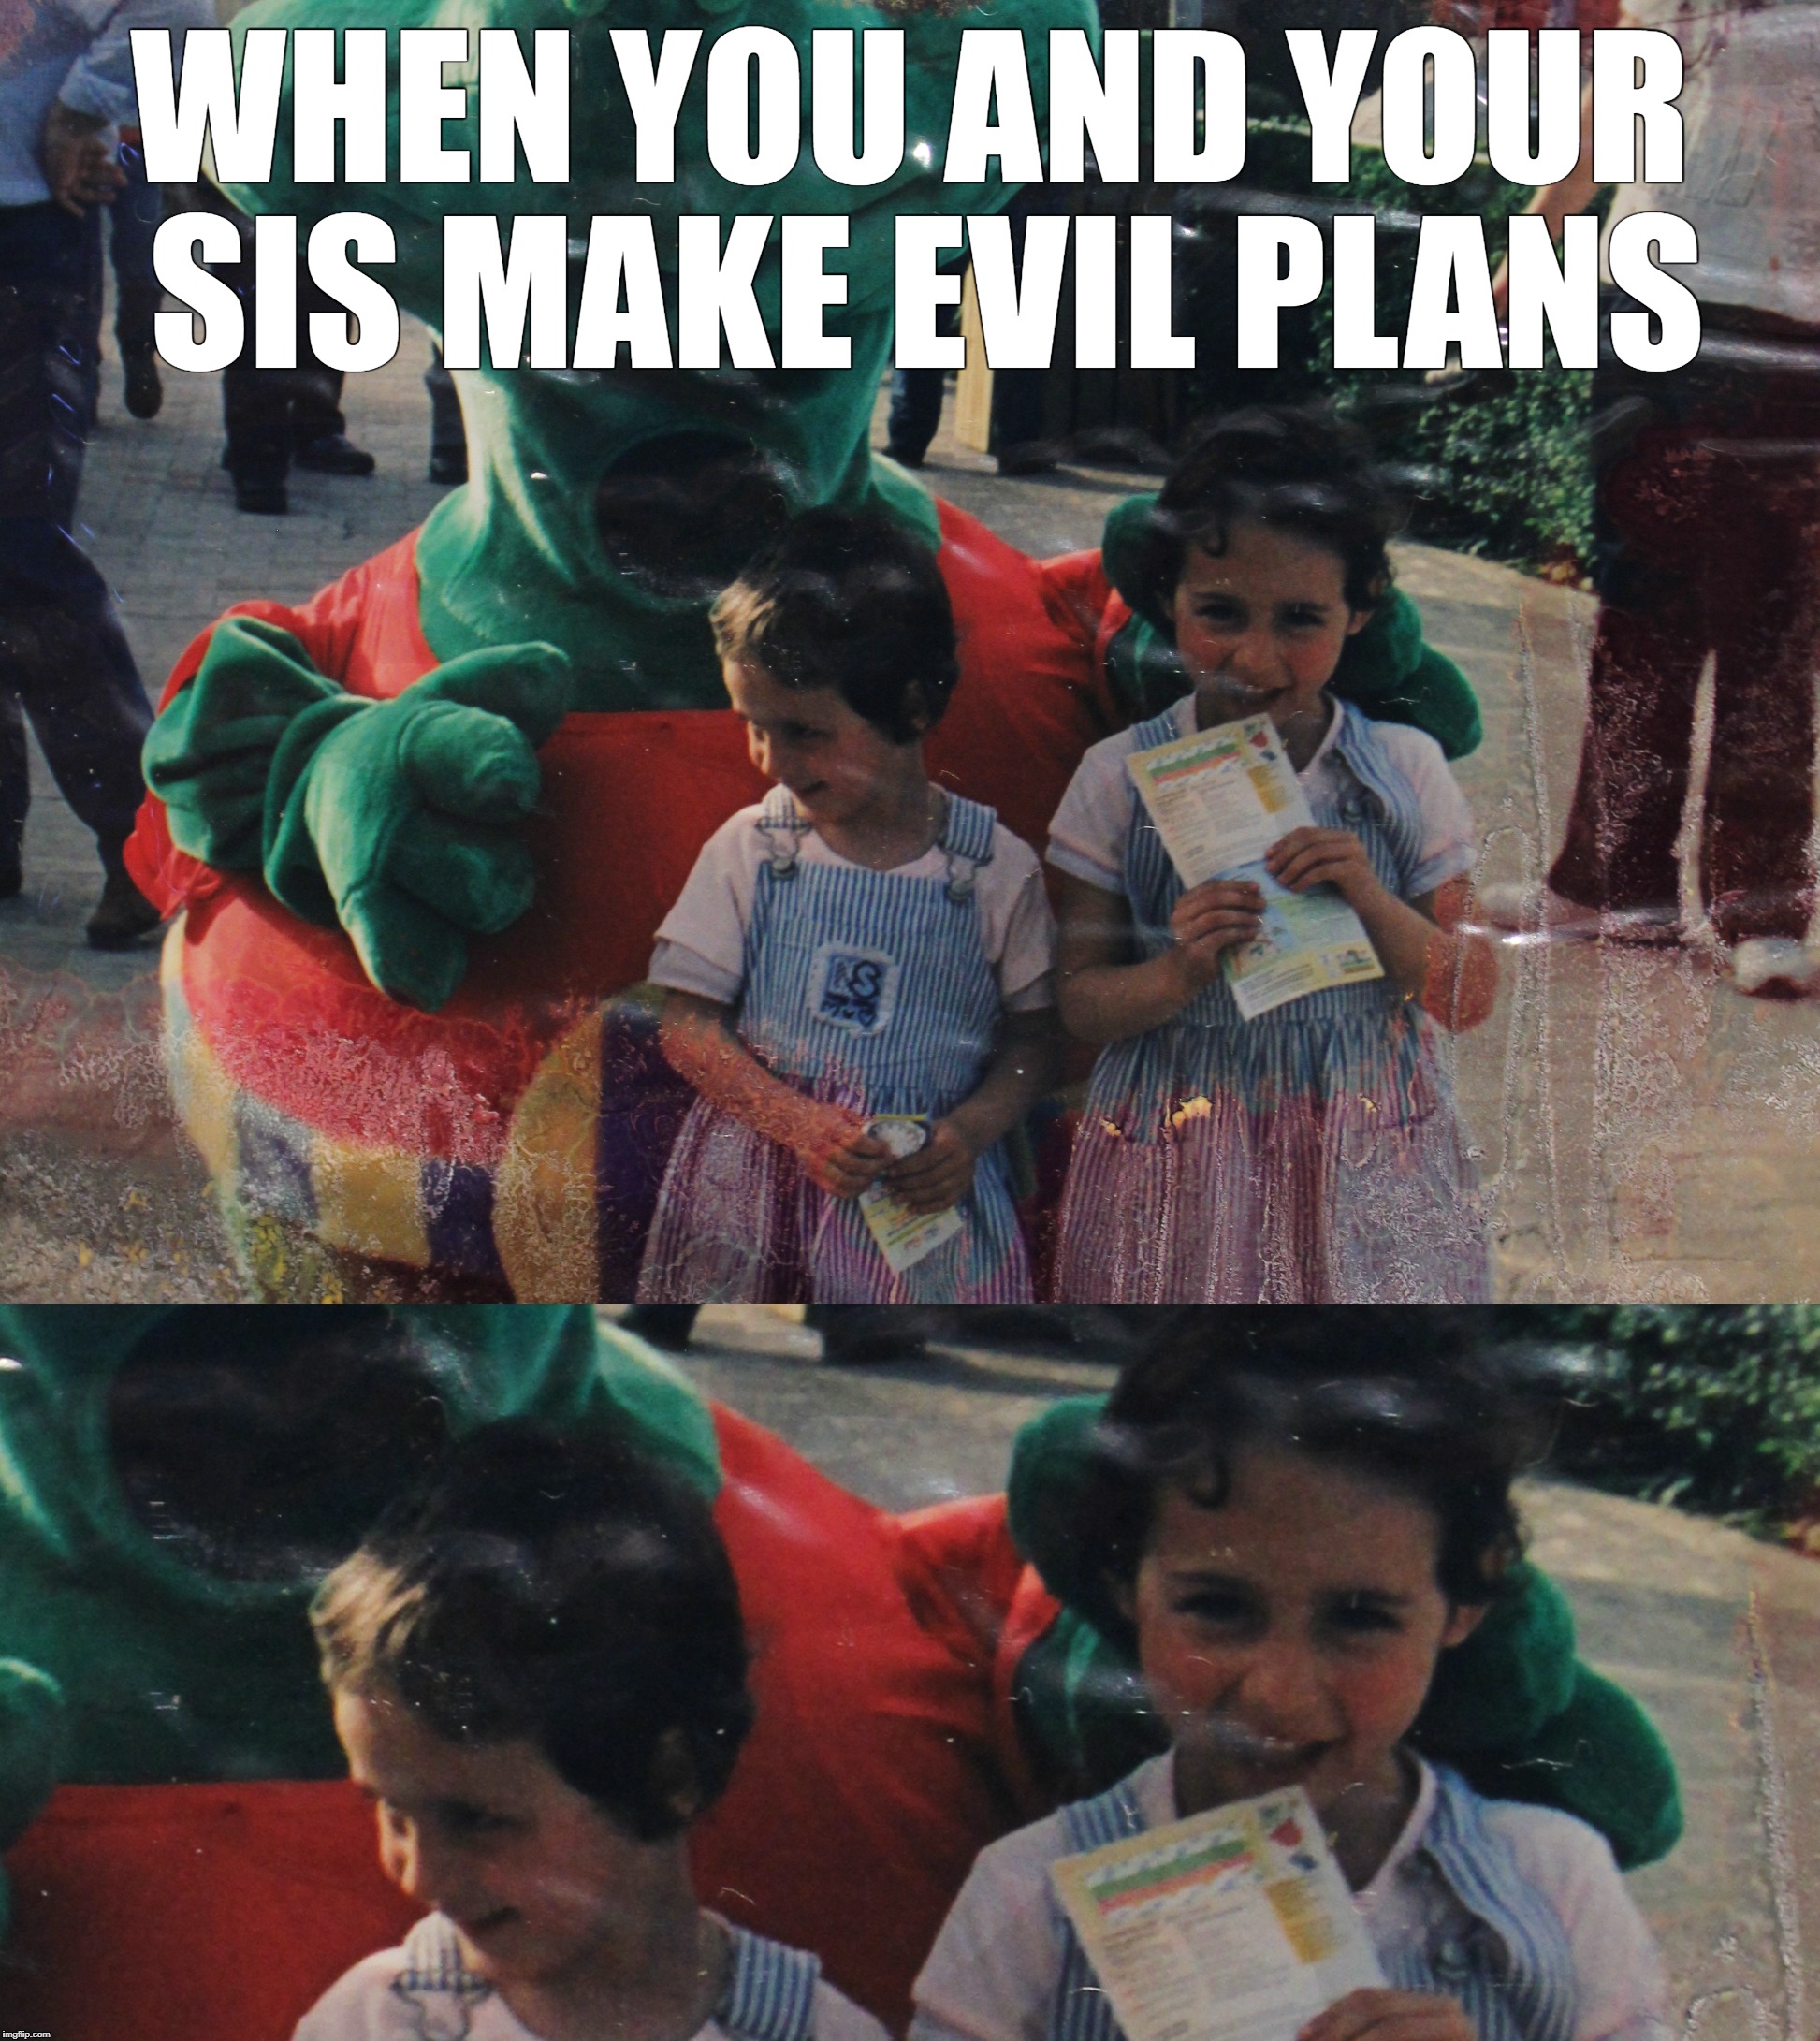 Evil plans | WHEN YOU AND YOUR SIS MAKE EVIL PLANS | image tagged in sisters,making plans,evil,memes,funny memes | made w/ Imgflip meme maker